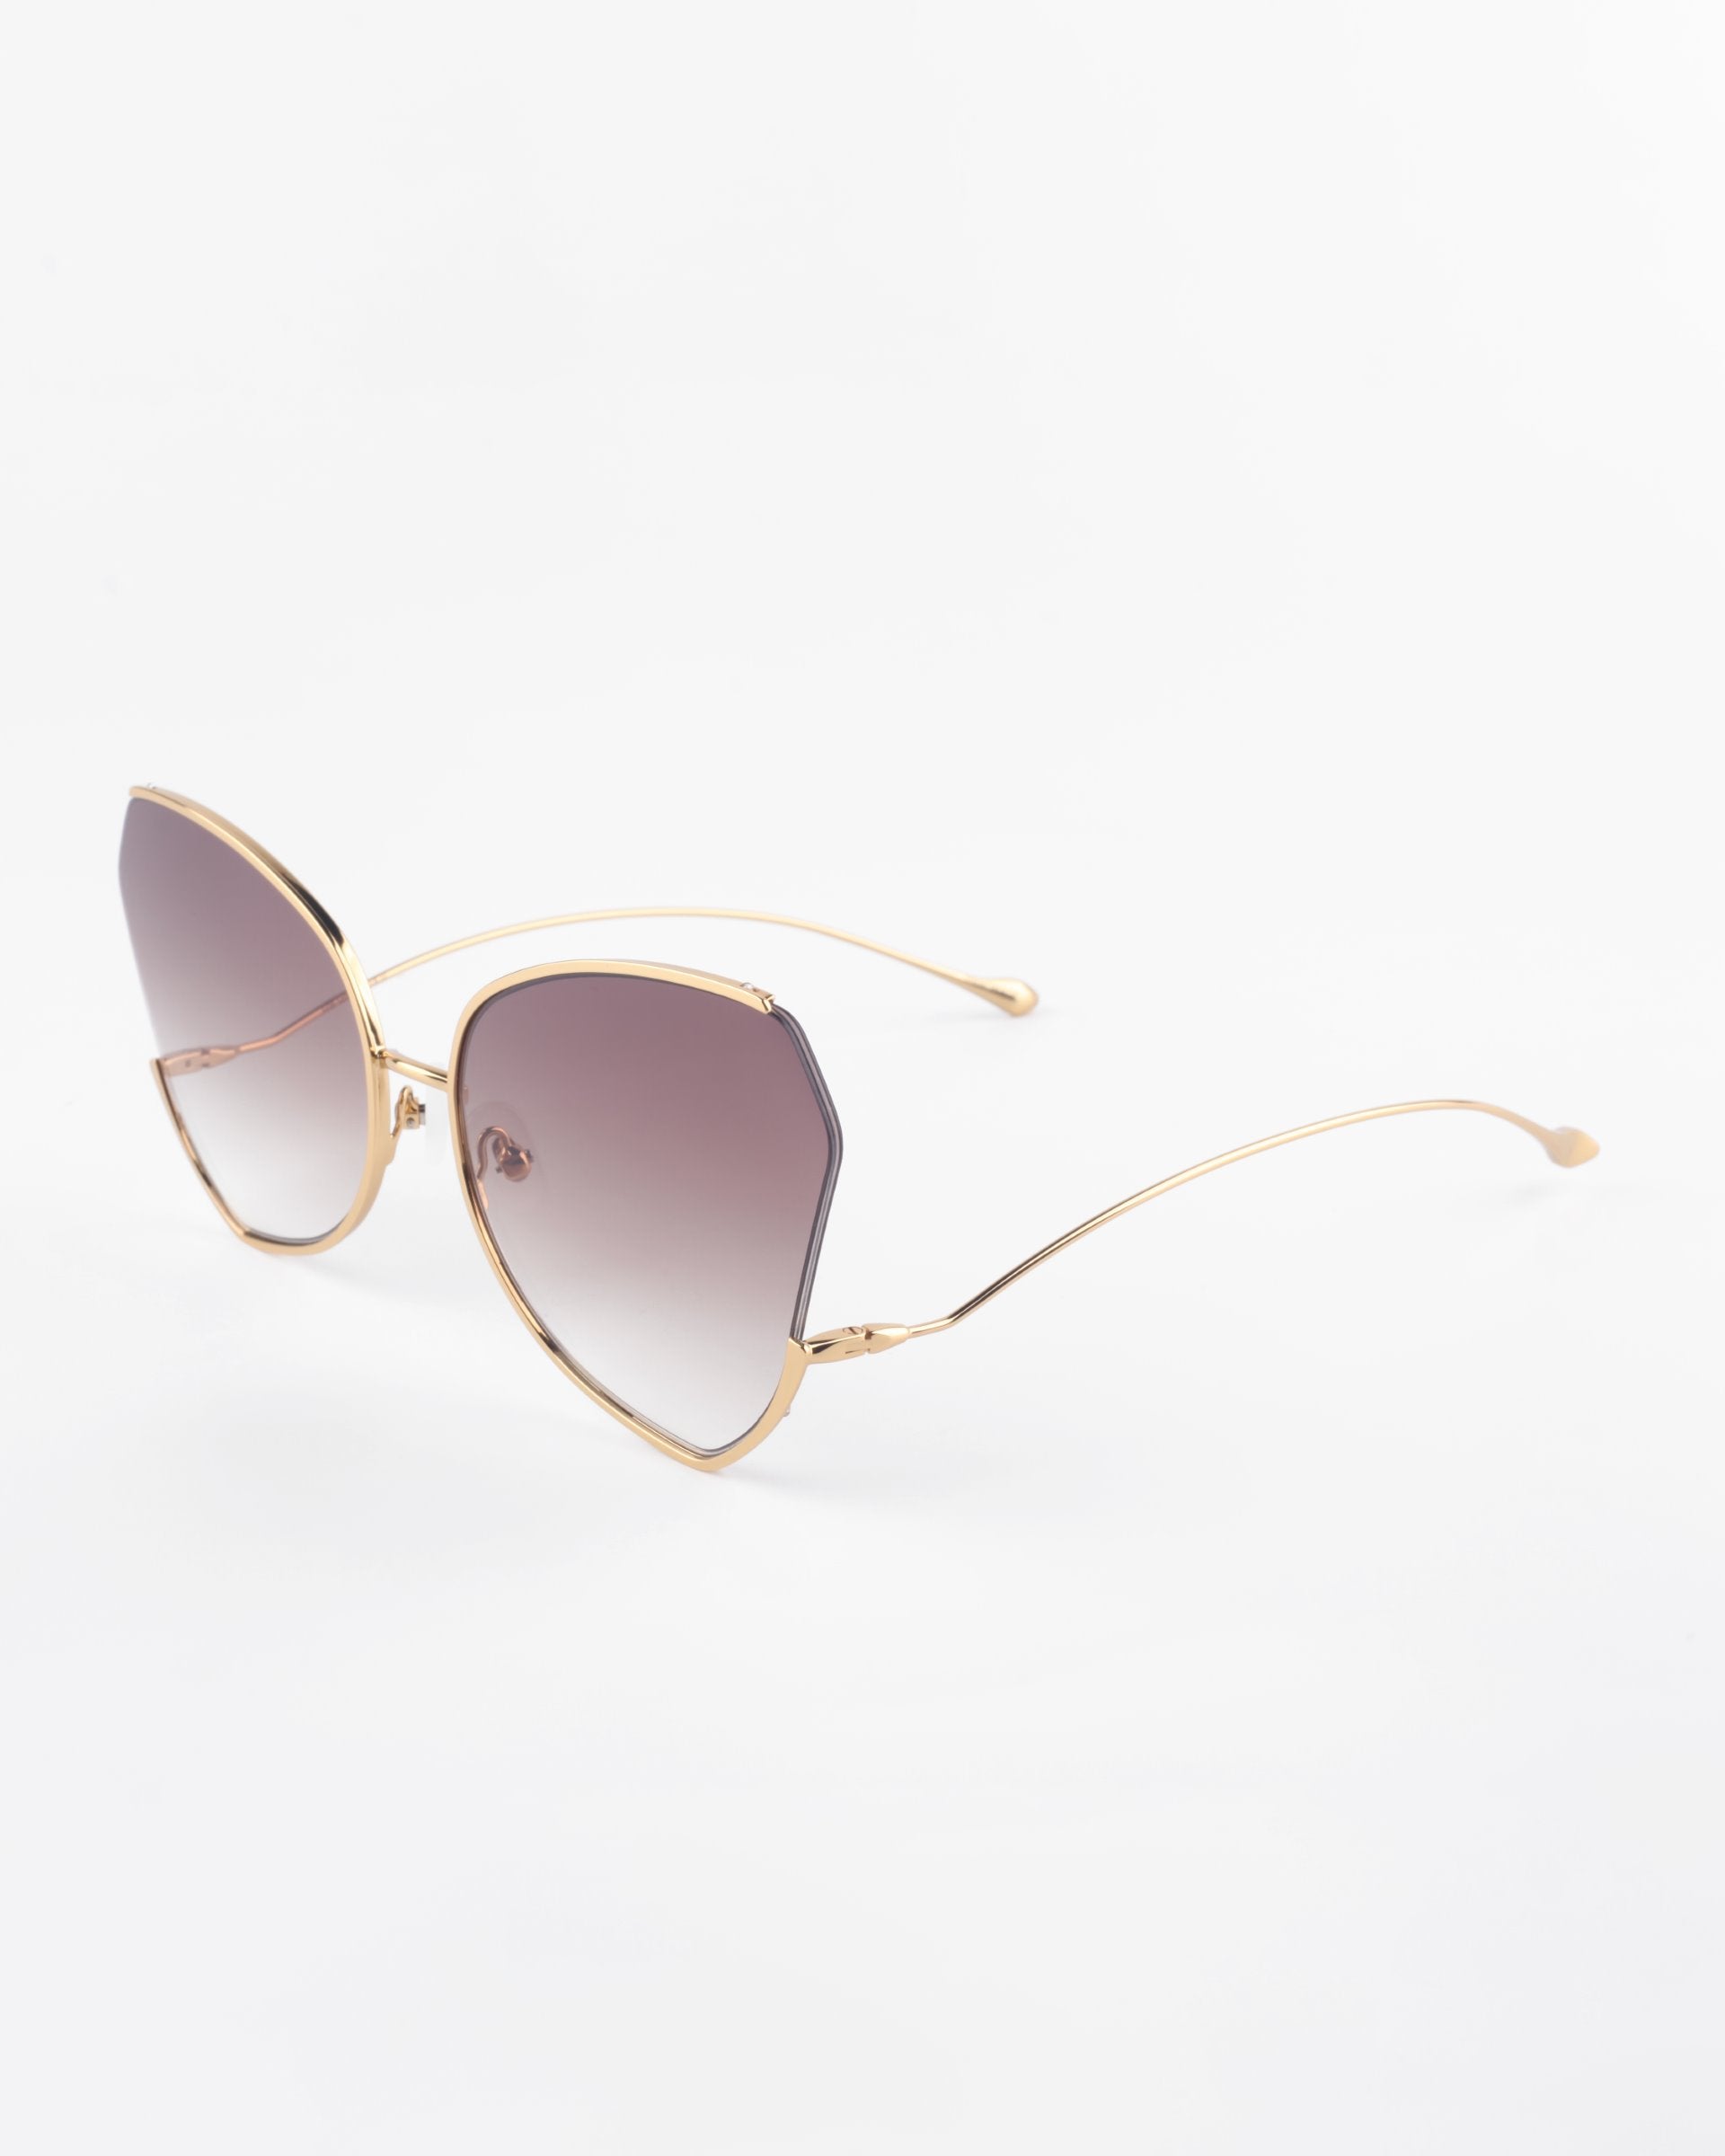 A pair of stylish, hexagon-shaped Watercolour sunglasses from For Art&#39;s Sake® with gold-plated stainless steel frames and gradient brown ombré lenses. The delicate, thin arms of the glasses extend softly, ending in small, curved tips for comfort. The overall design is sleek and contemporary.